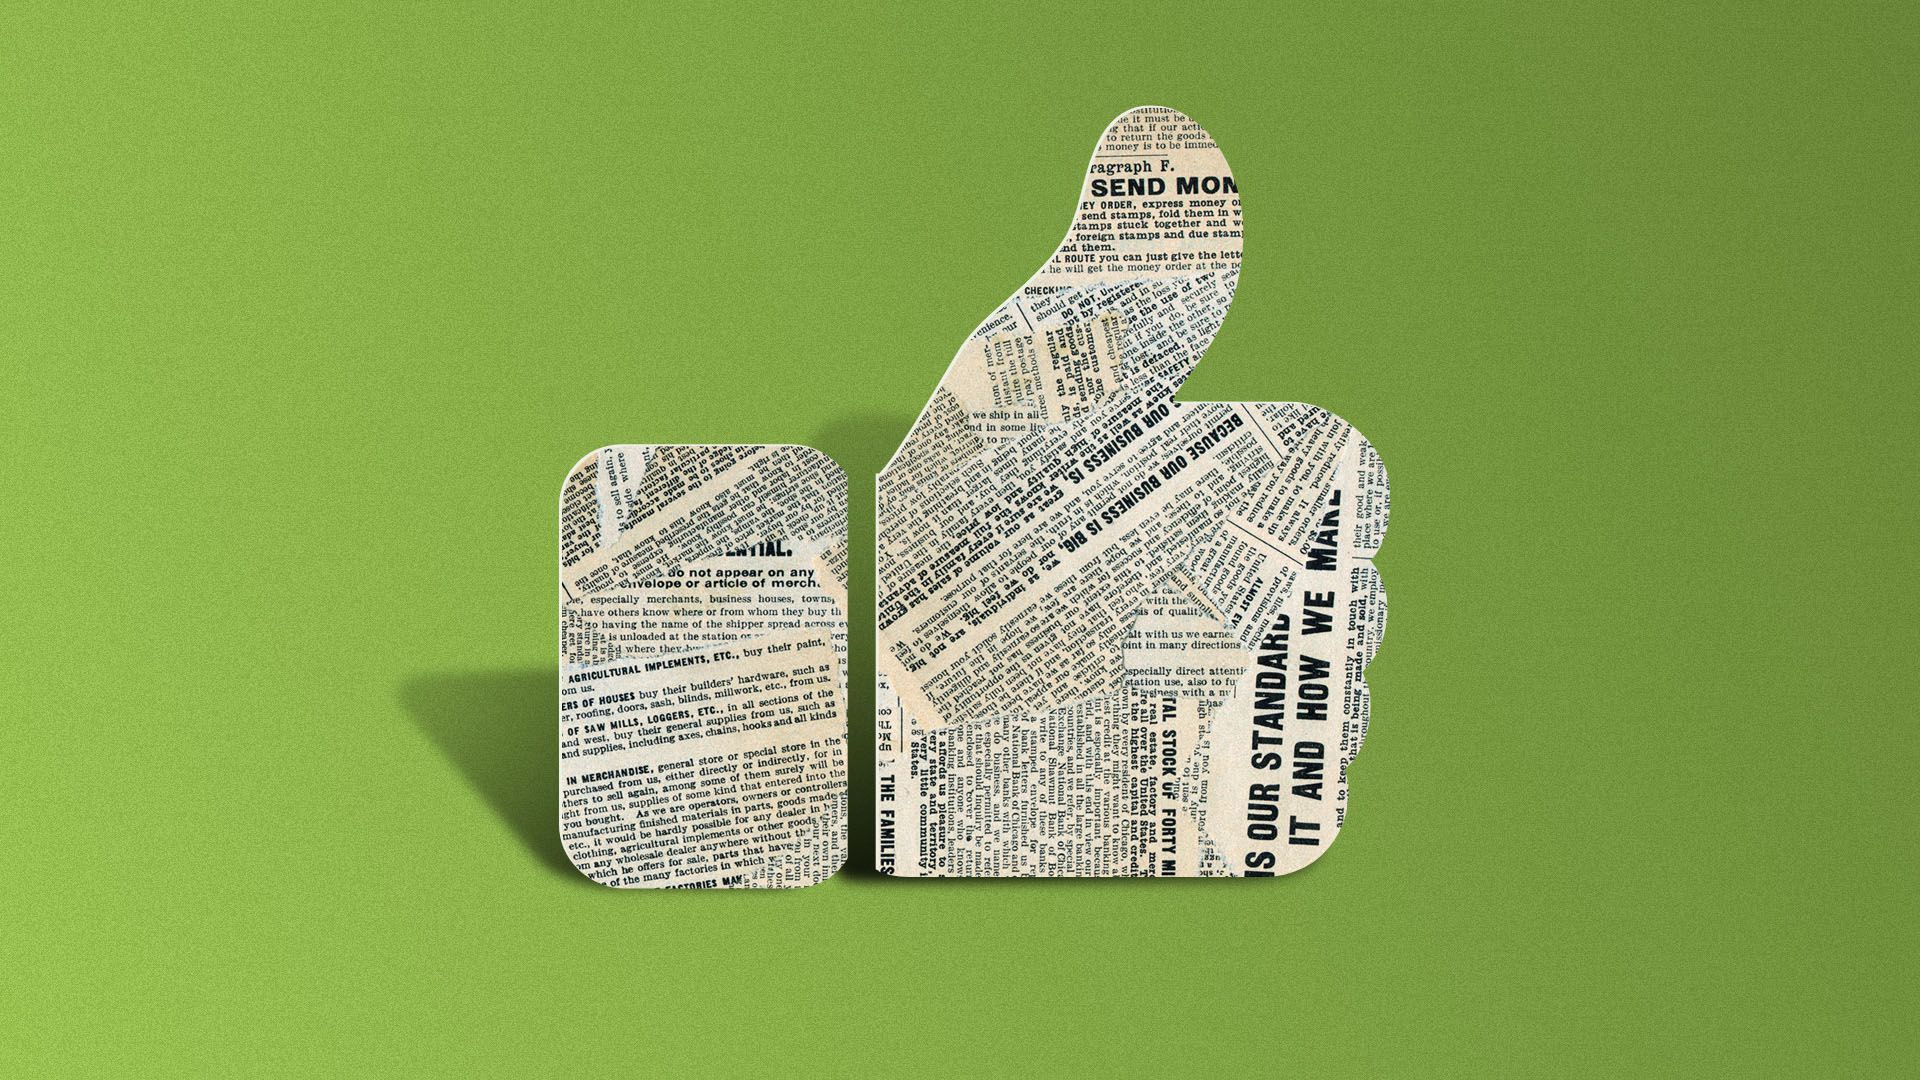 Illustration of a thumbs up made out of newspaper